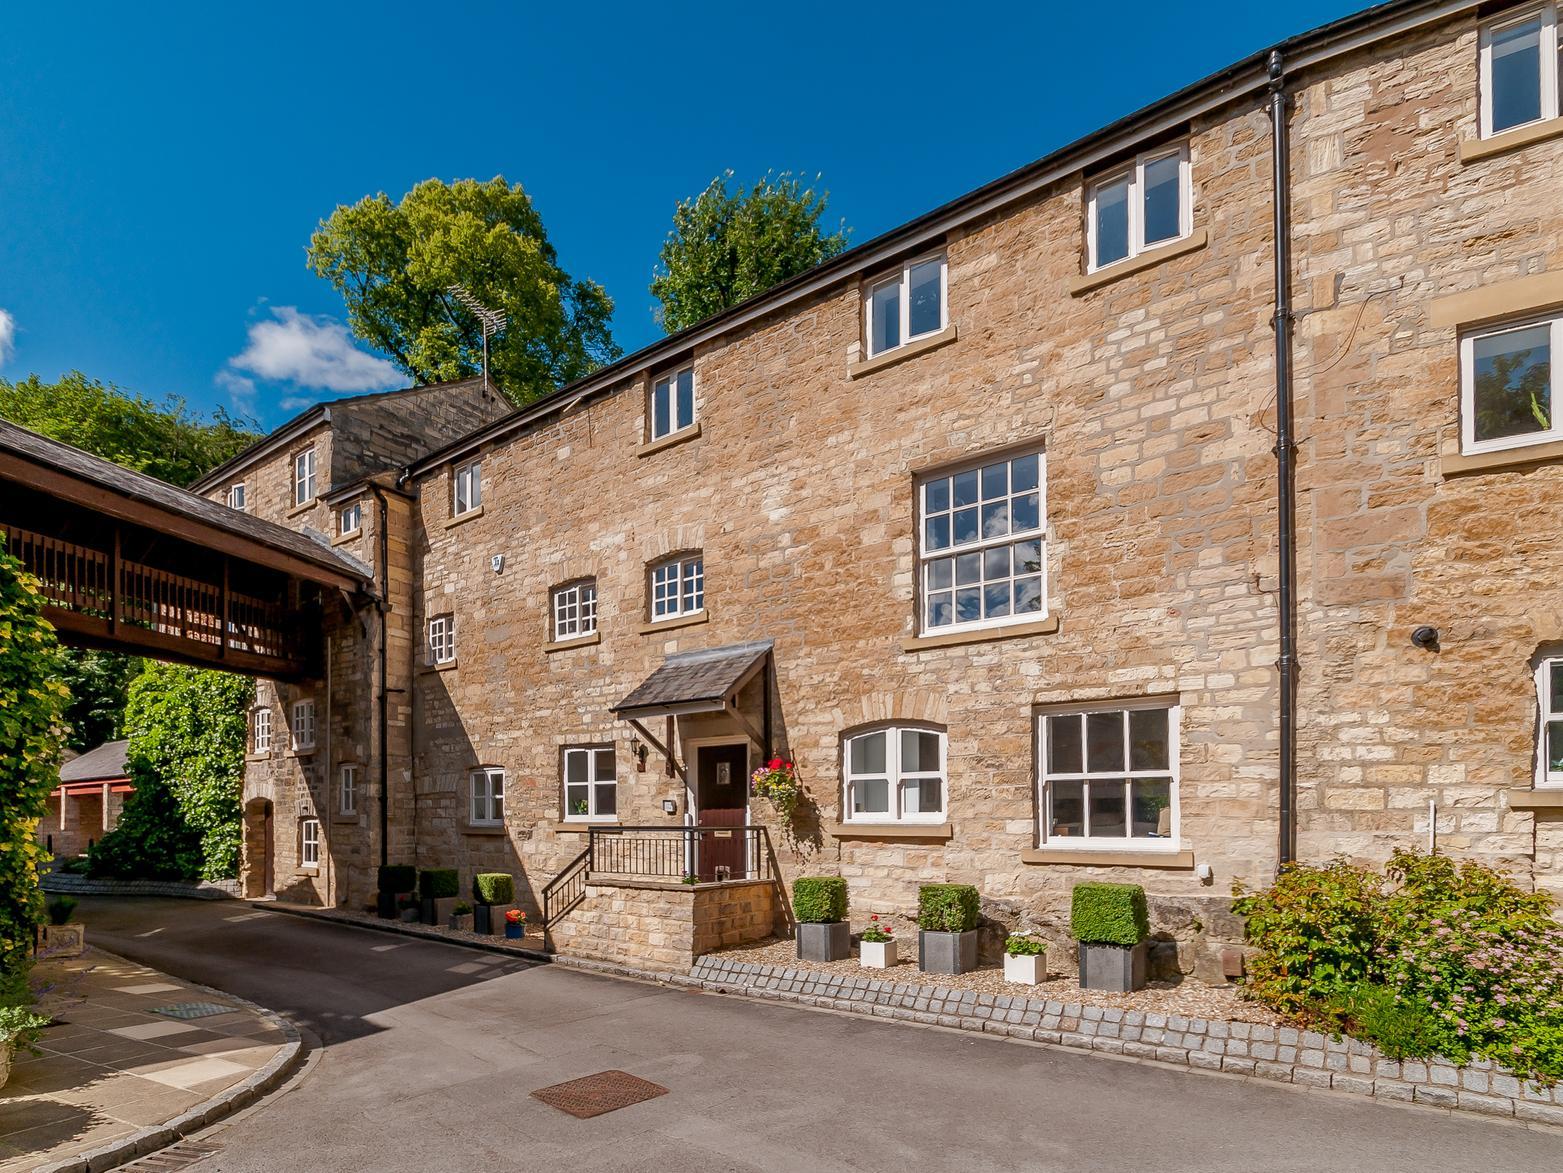 A beautifully situated Grade II listed property providing spacious andwell presented accommodation arranged over 3 floors, forming part of an exclusive riverside development.